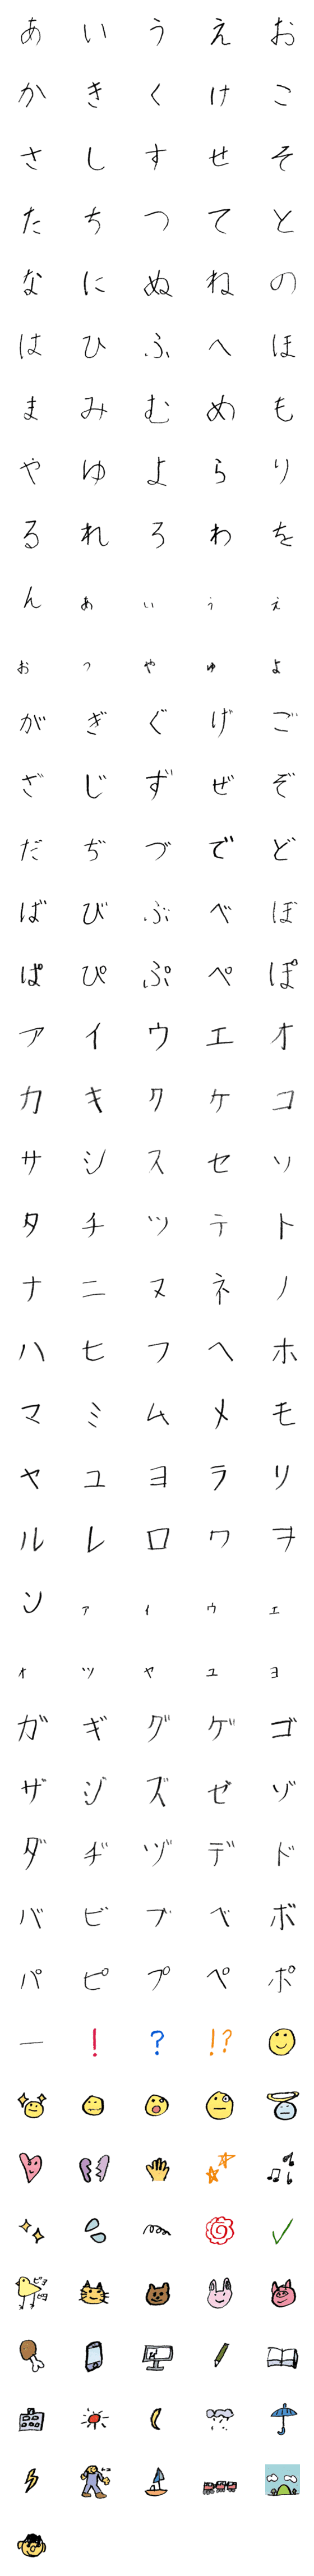 [LINE絵文字]一年生のフォントの画像一覧